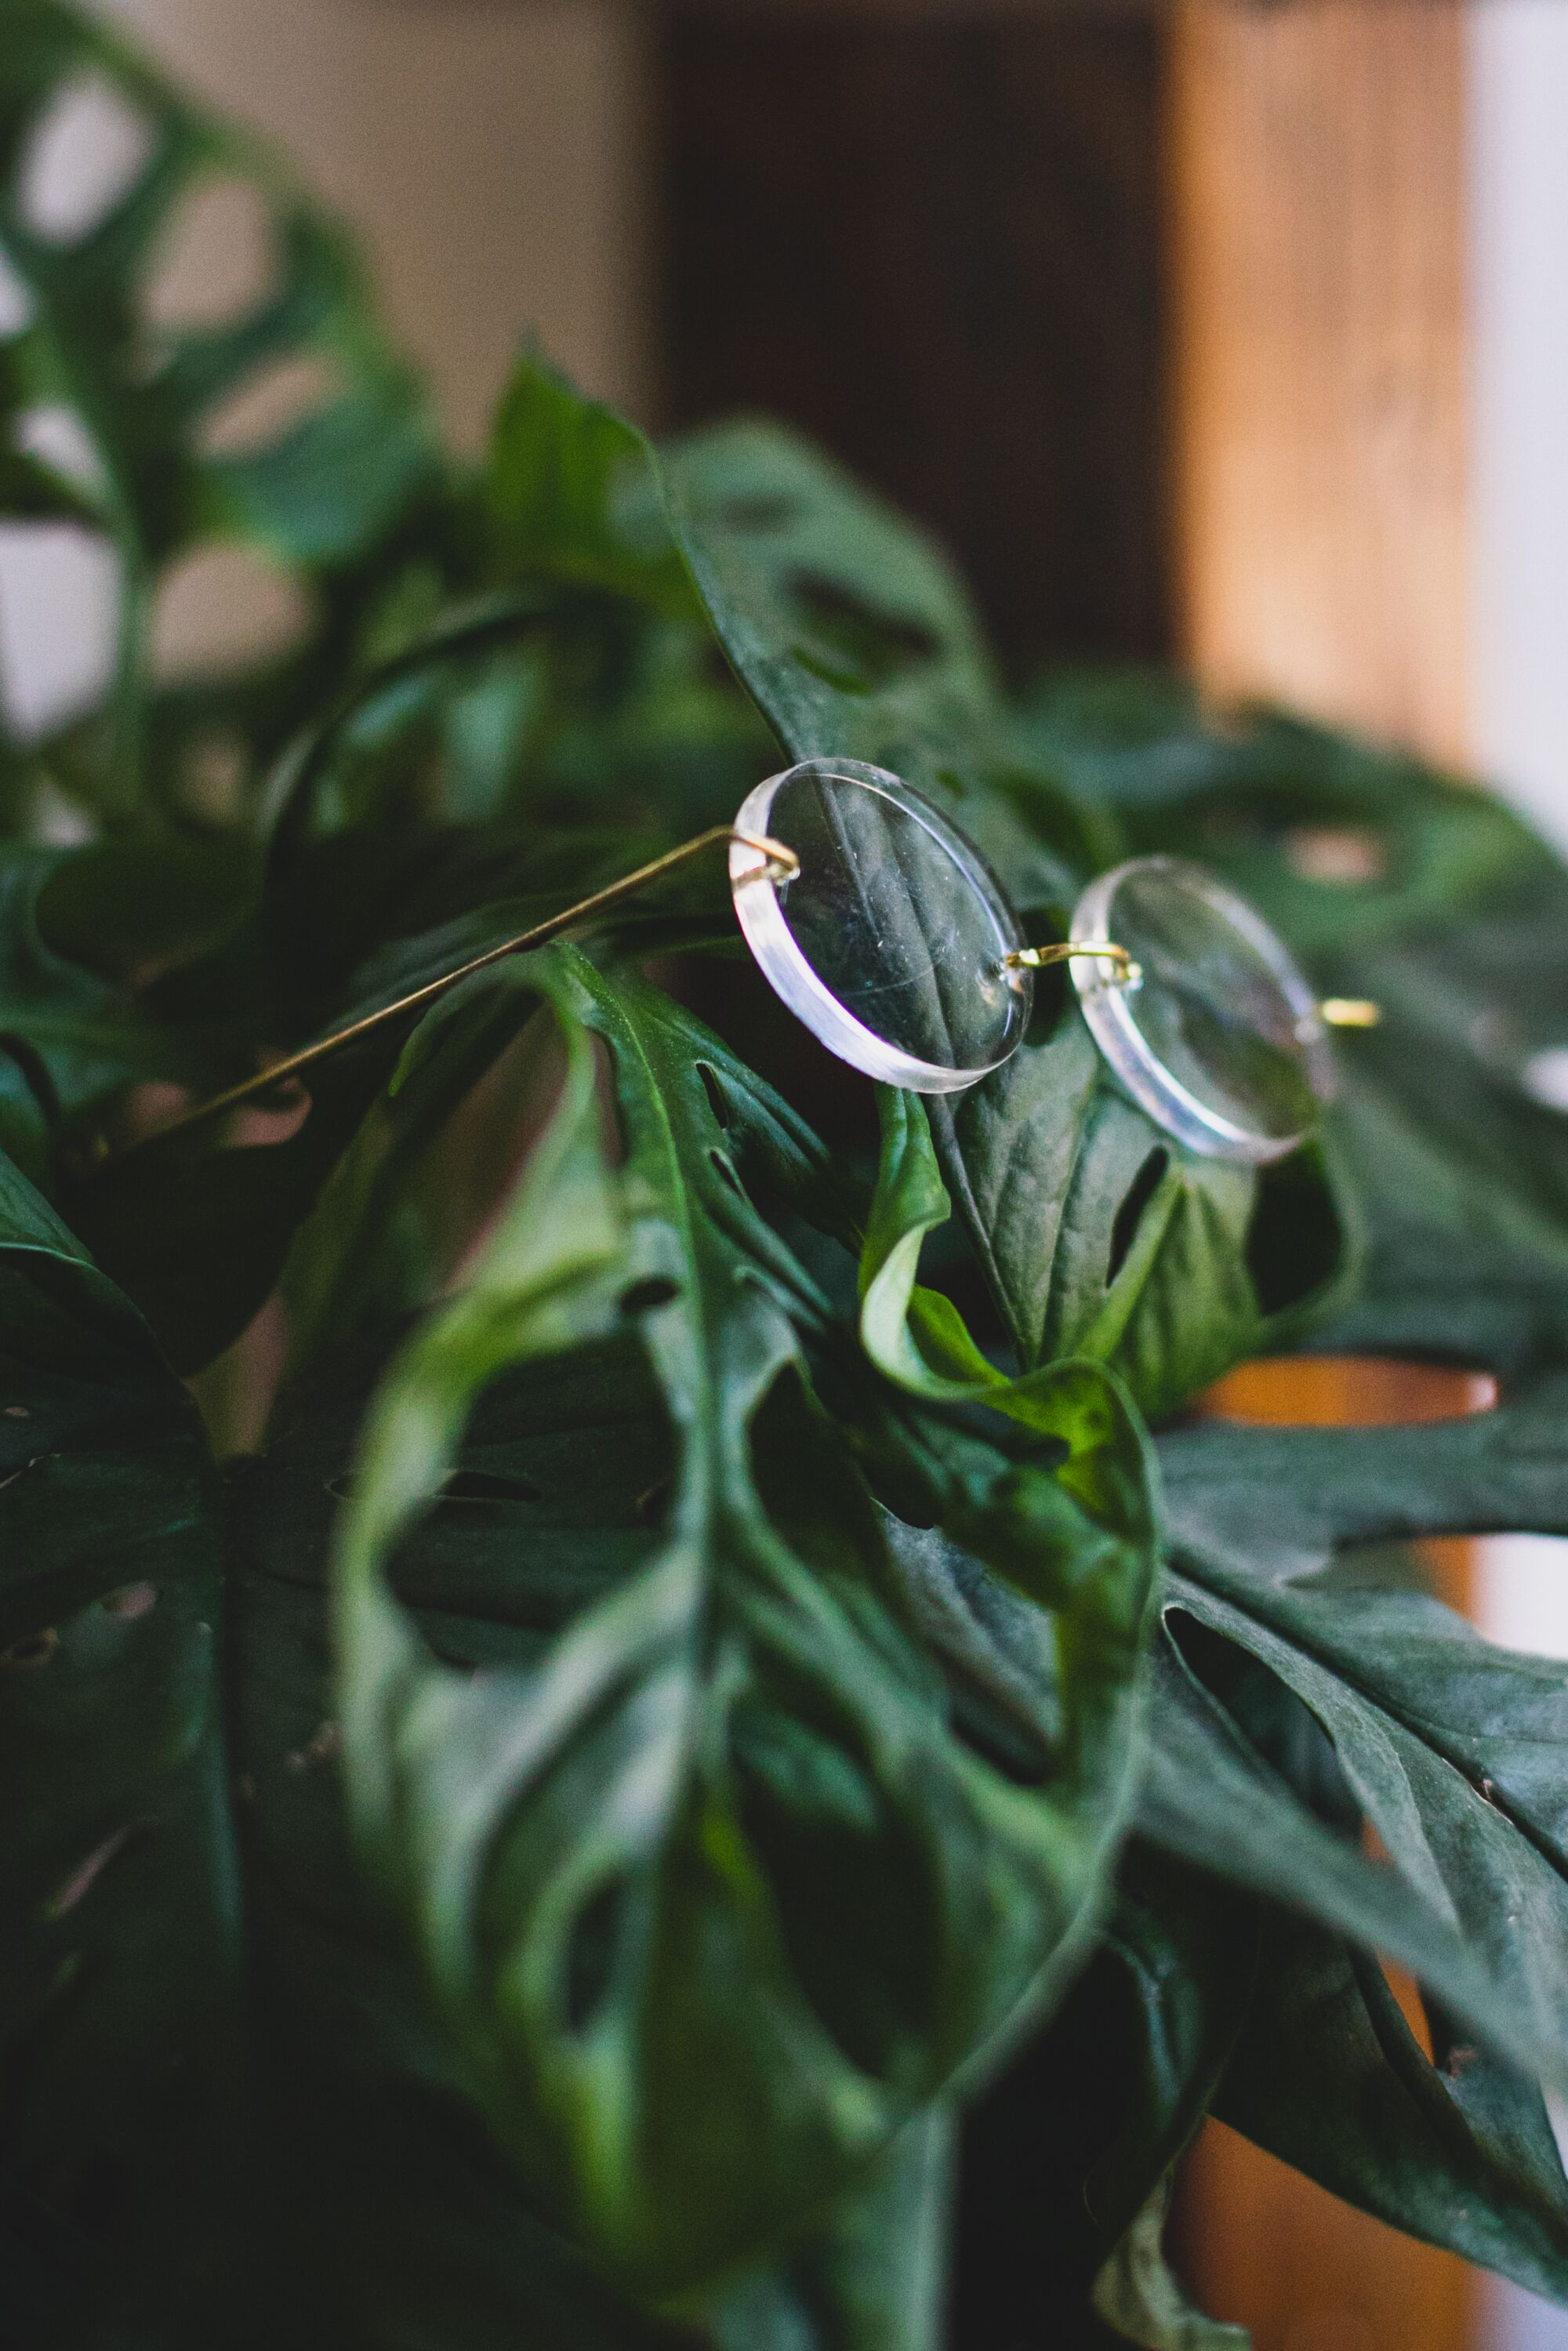 Glasses are placed on a green plant.